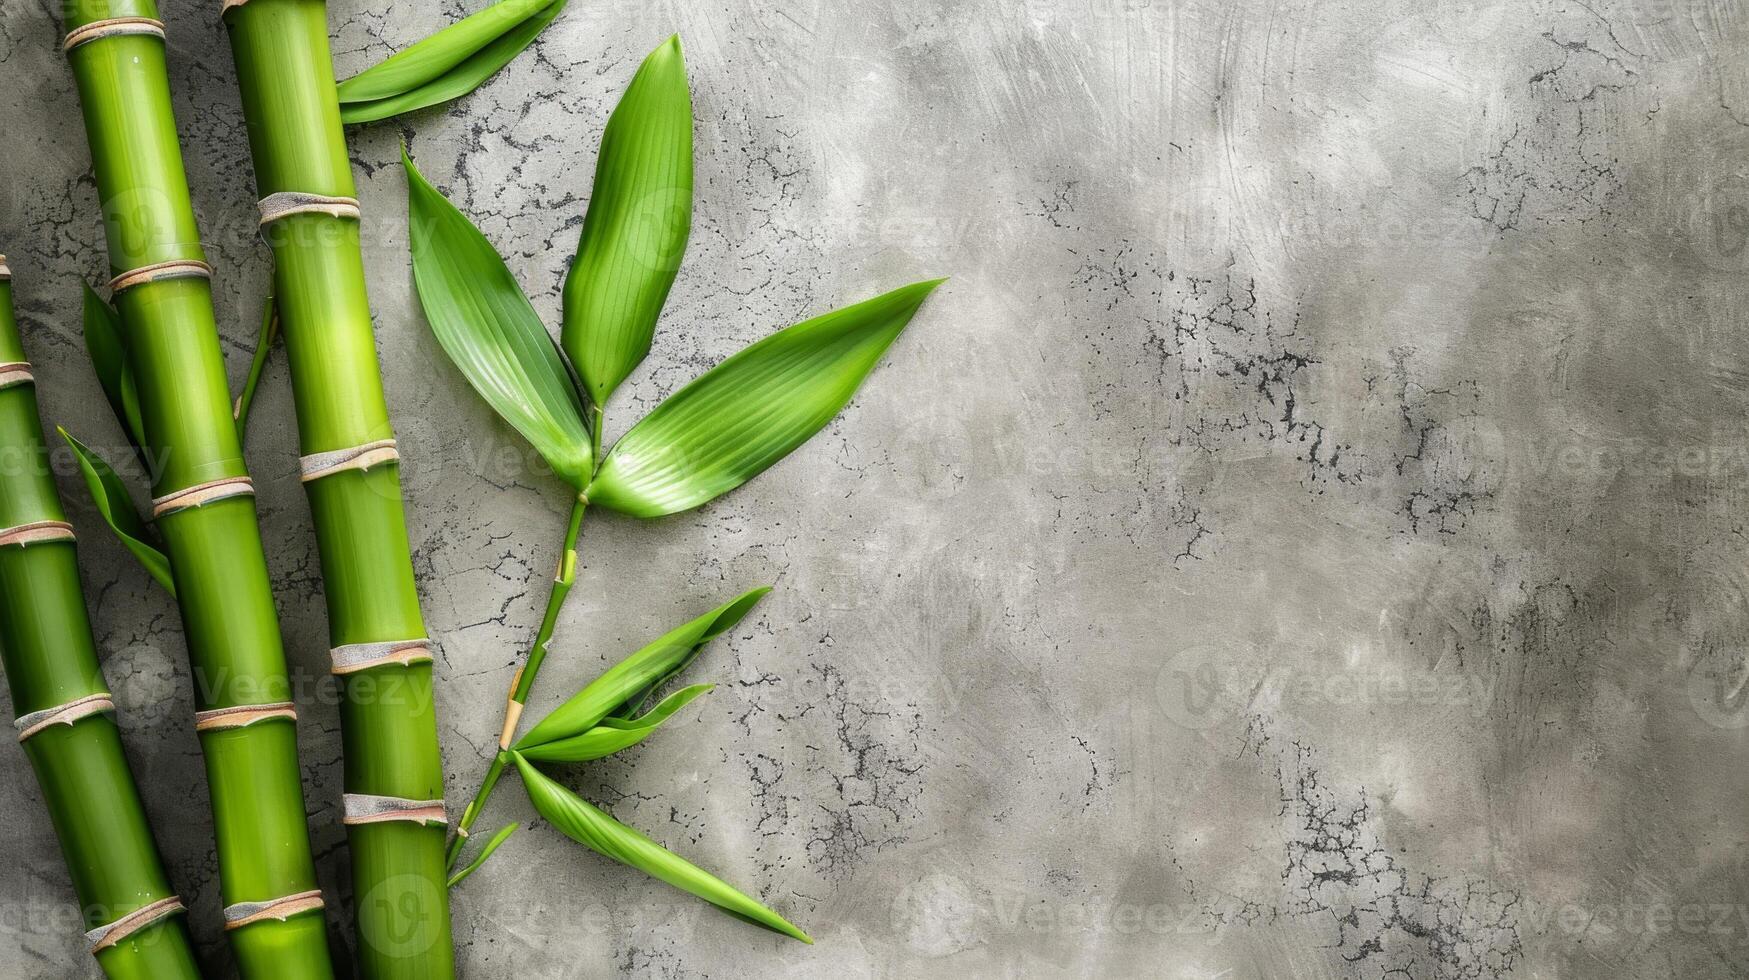 Bamboo stalks and leaves over textured green and concrete background with natural eco aesthetic photo